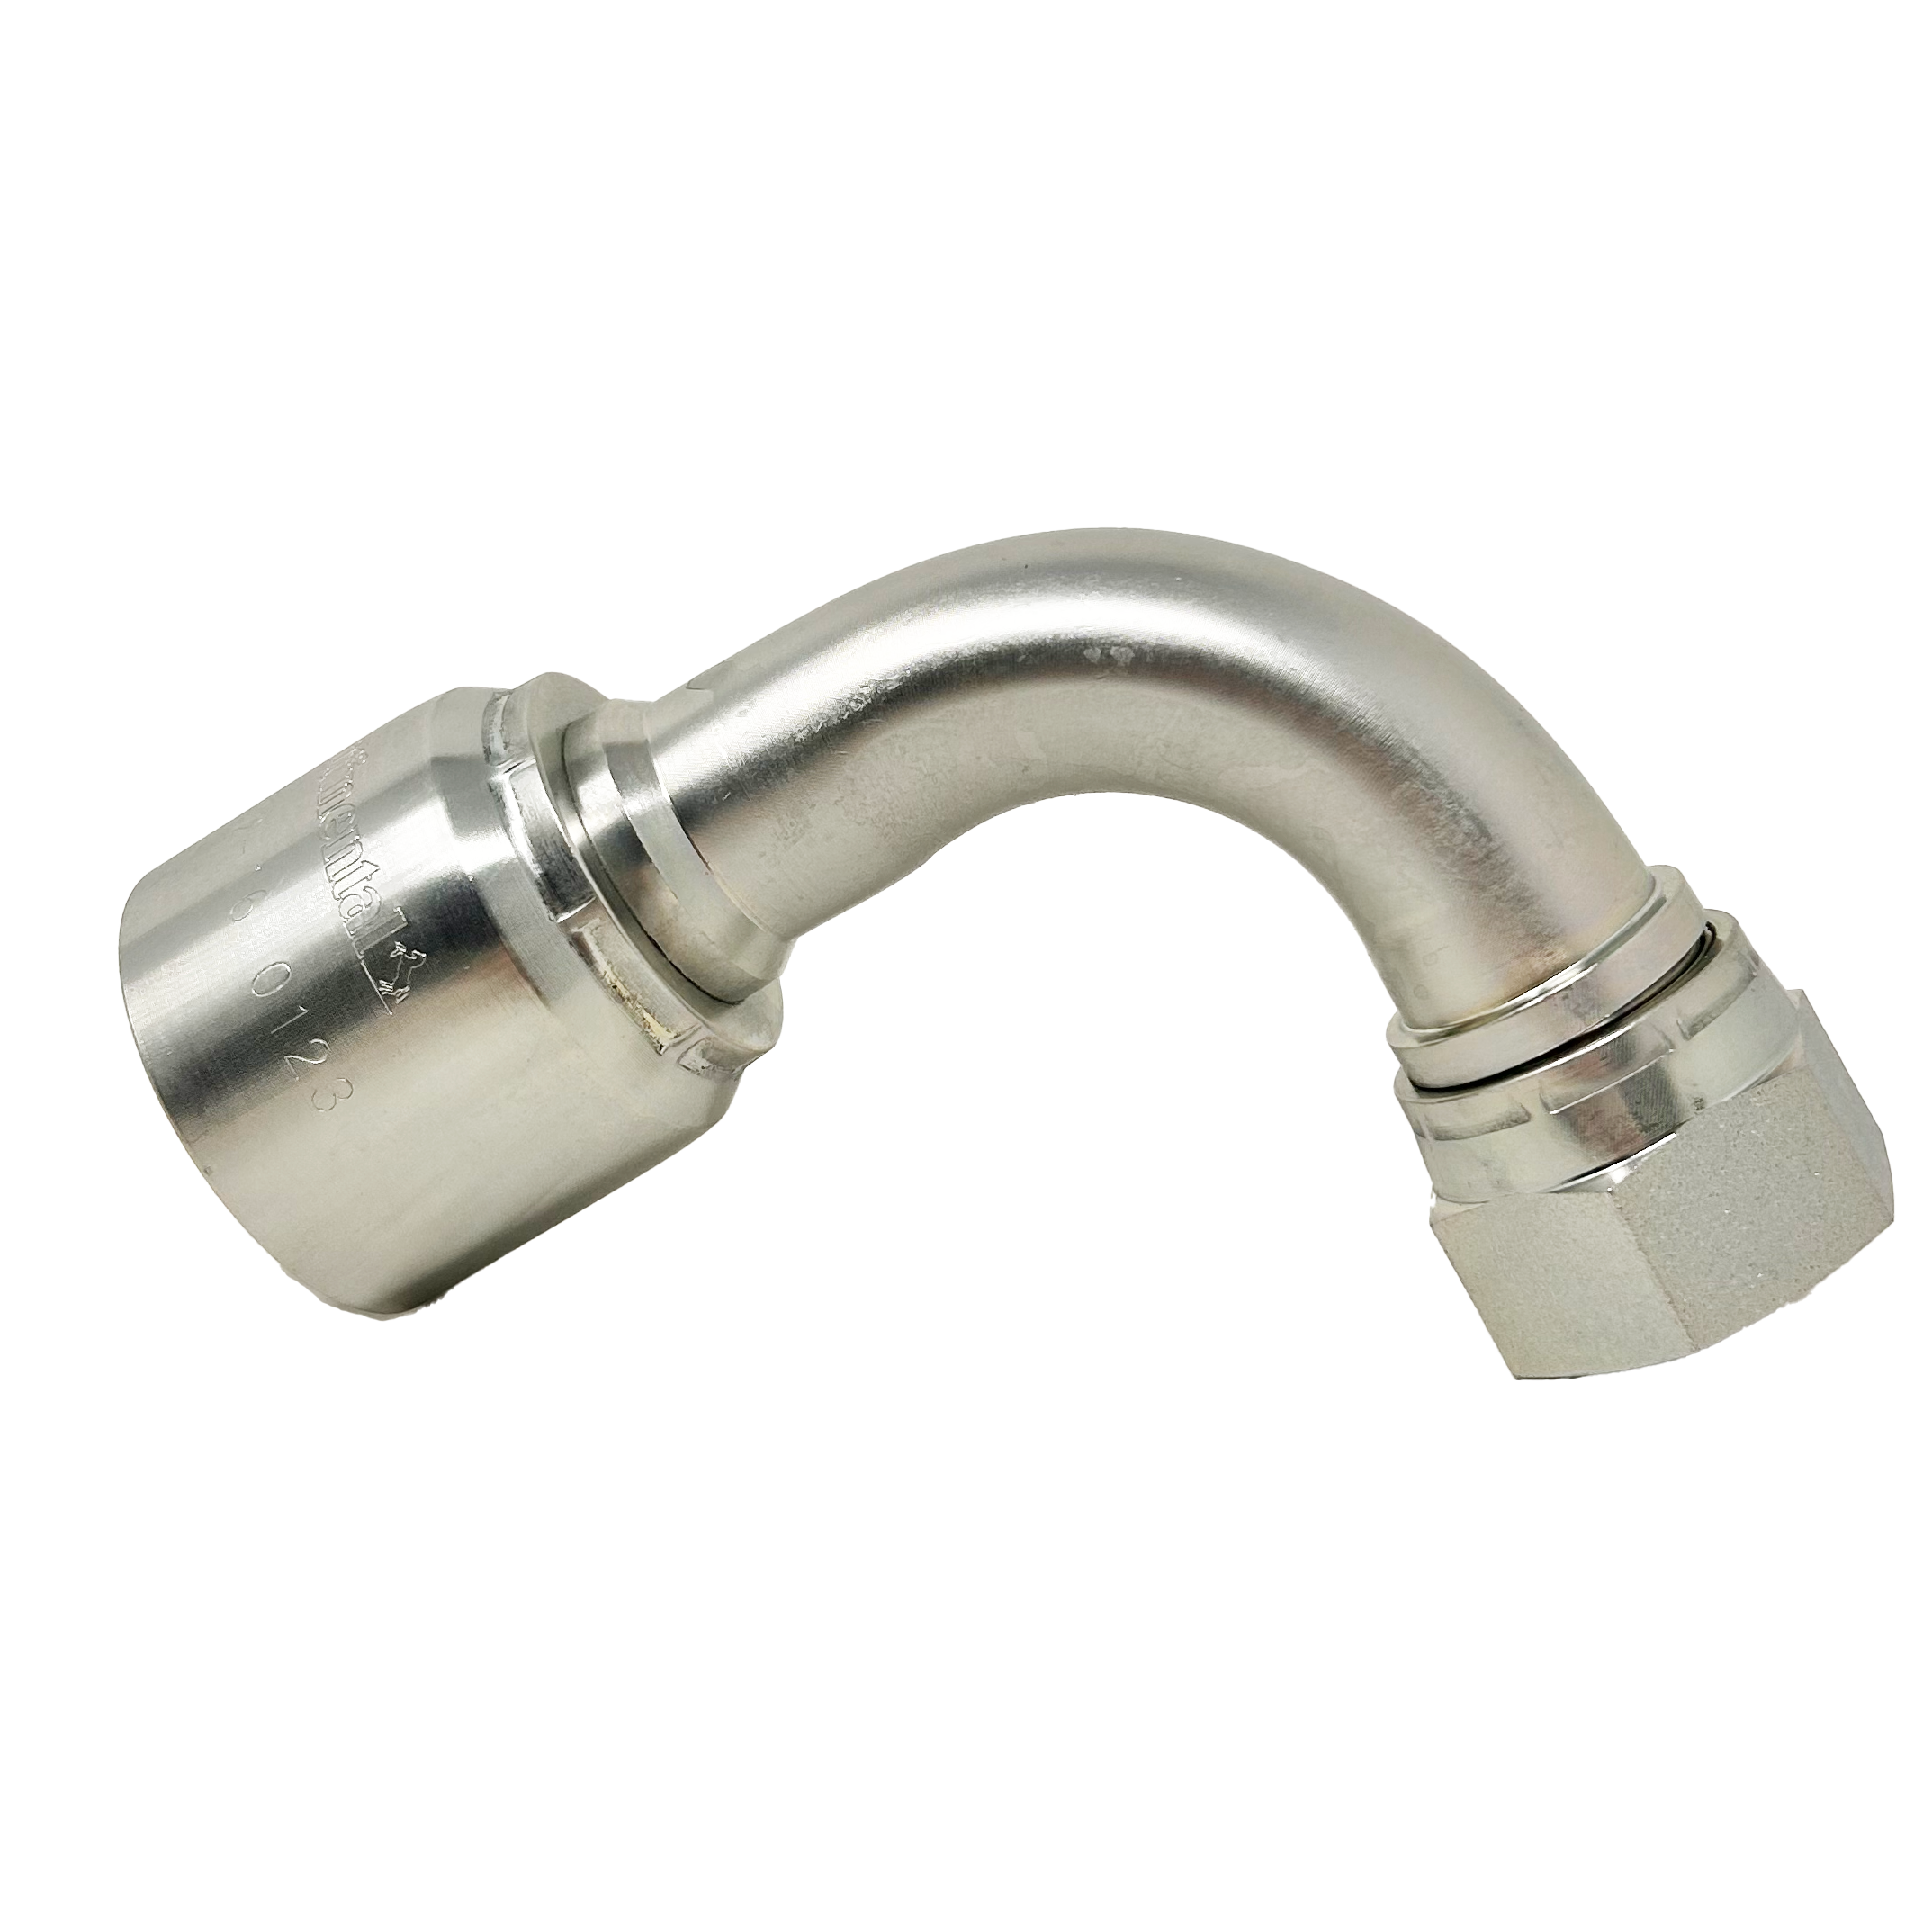 B2-JCFX90-3232S: Continental Hose Fitting, 2" Hose ID x 2-1/2-12 Female JIC, 90-Degree Swivel Connection